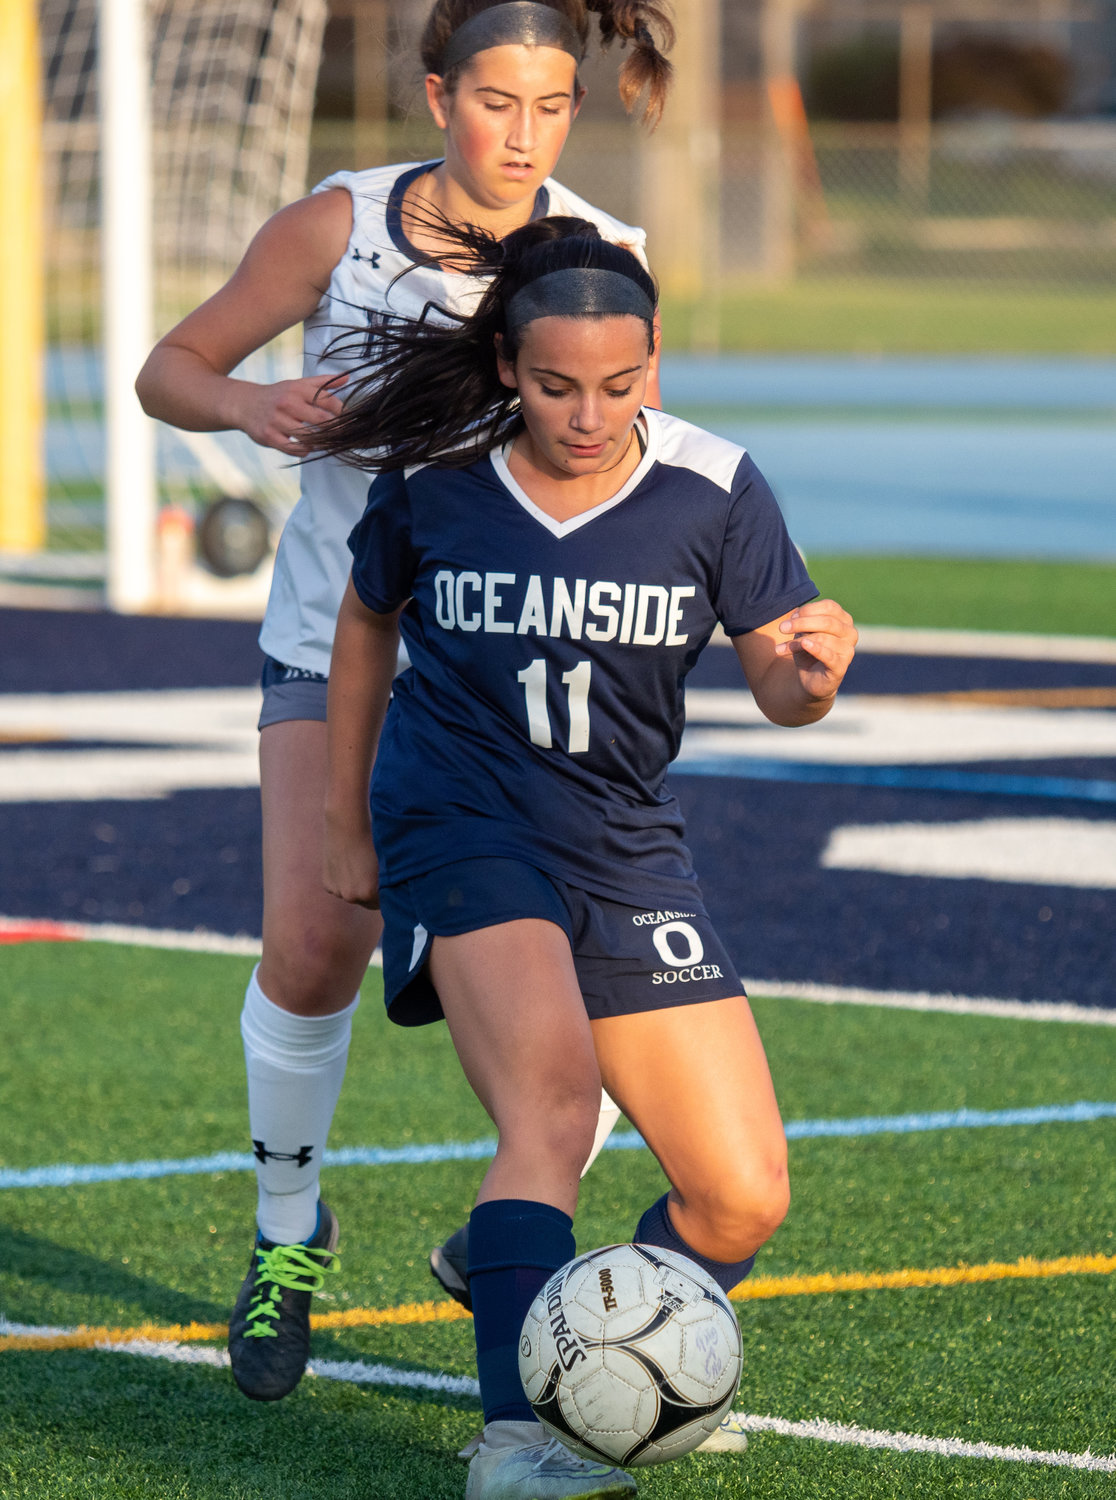 Varsity newcomer Samantha Gemmo has chipped in two goals for the Sailors, who hope for a strong finish after a challenging start.